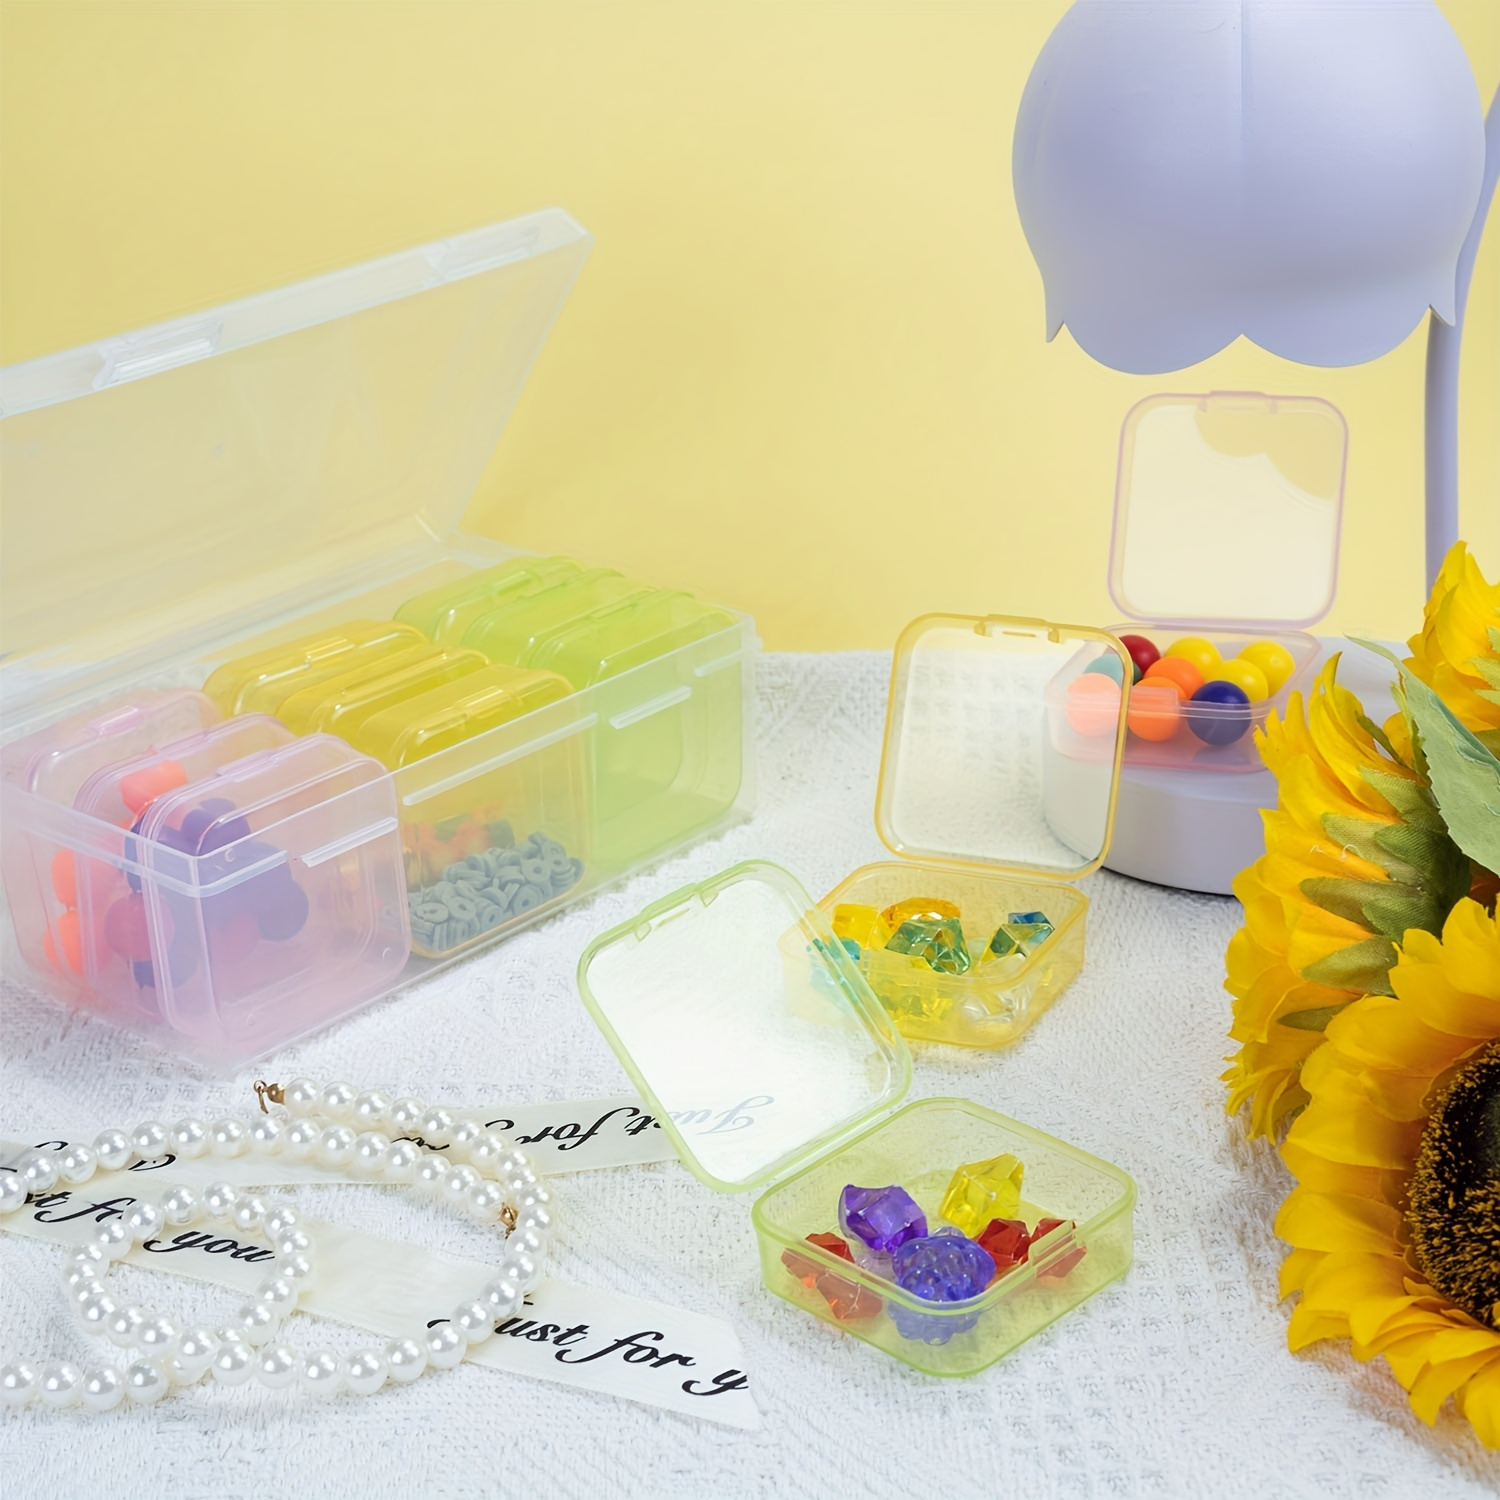 12pcs Mini Plastic Storage Box, Small Jewelry Beads Organizer, Portable  Storage Box With Hinged Lid, Finishing Storage Container Box, For Small  Items